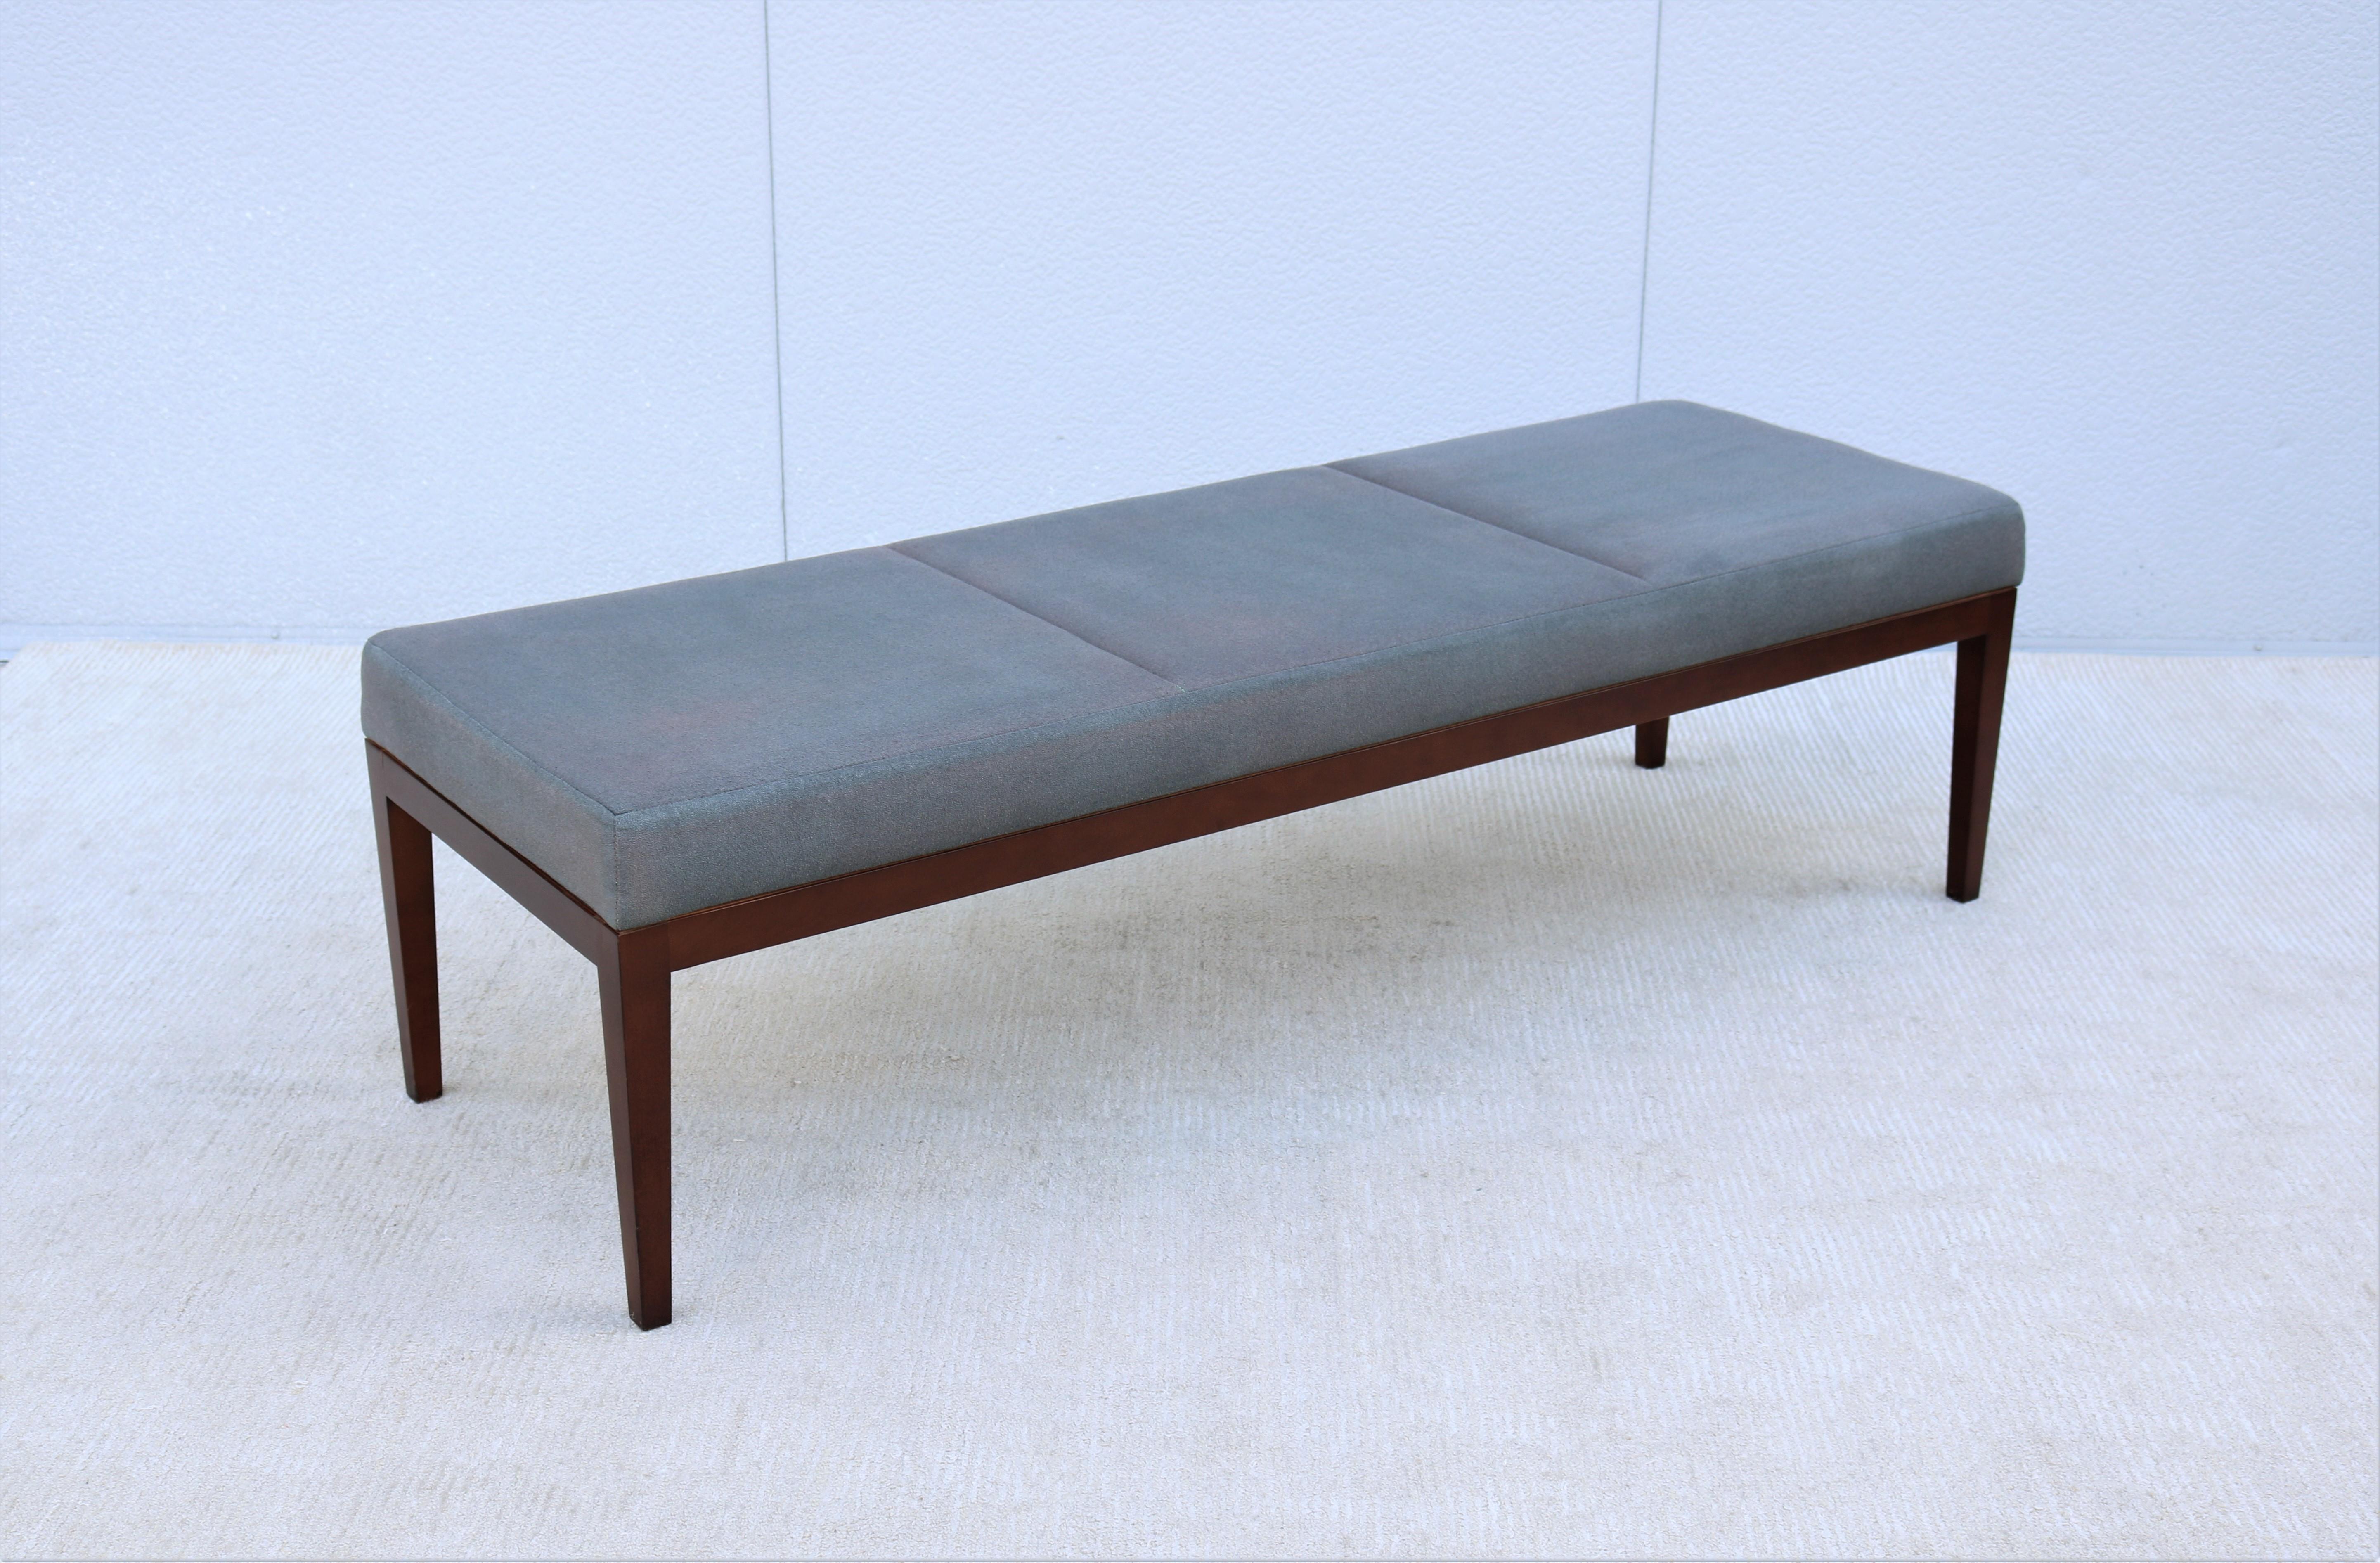 The Livy Bench by Cumberland is a simplistic and captivating piece that brings gratification to any home.
This bench is the picture-perfect accent piece for any living room or bedroom. 
It would make a great coffee table or accent